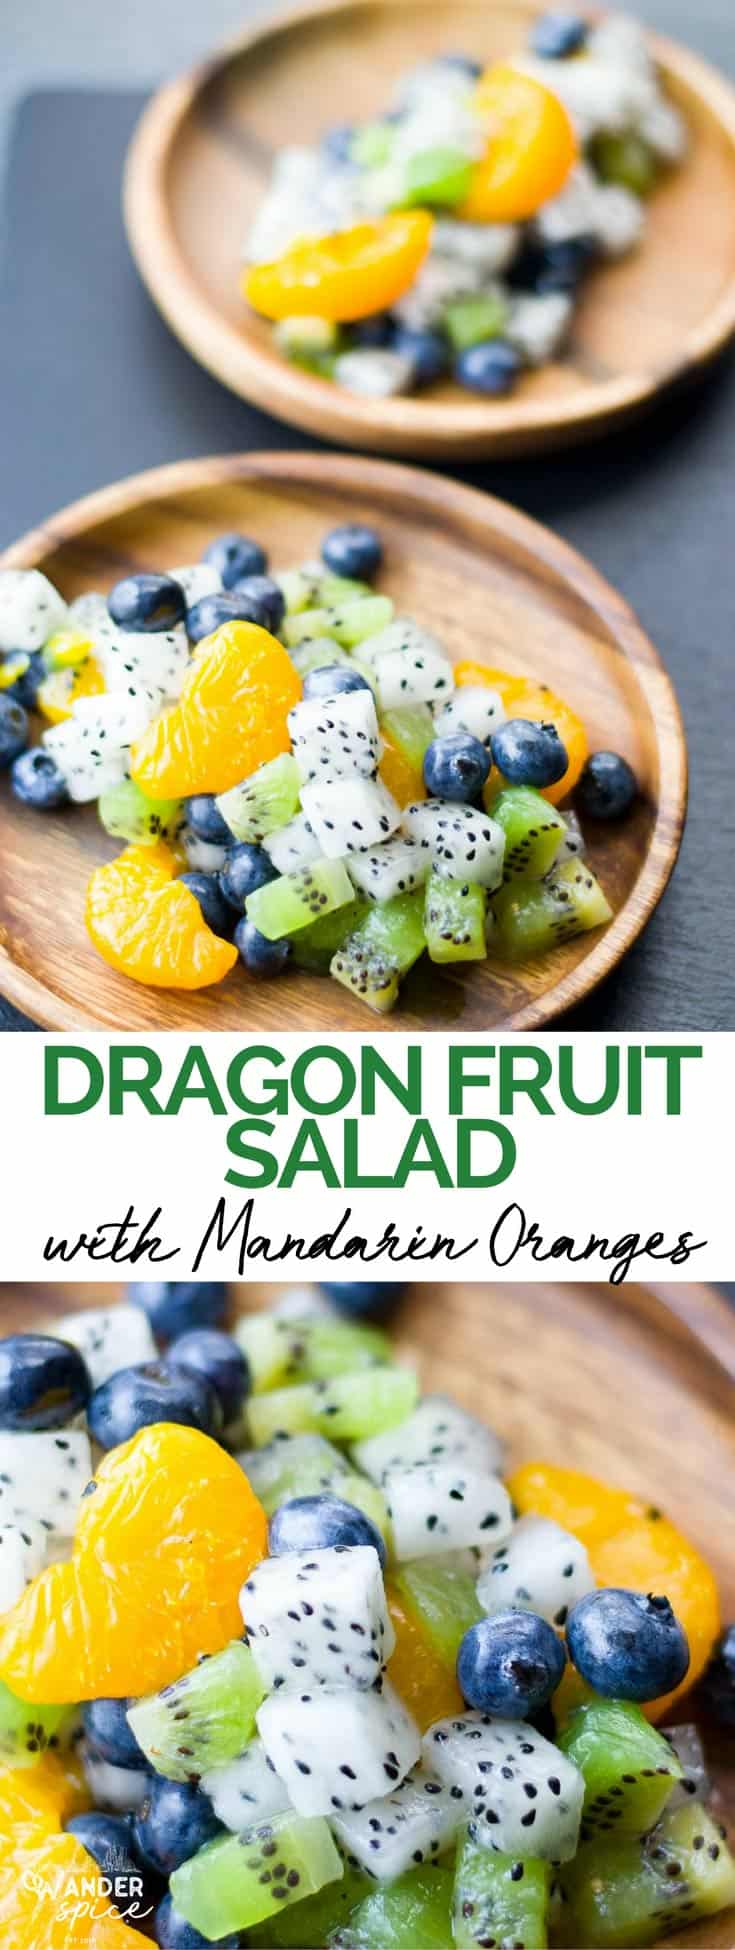 Dragon Fruit Salad Recipe with Mandarin Oranges and Kiwis. Easy and fast to make.